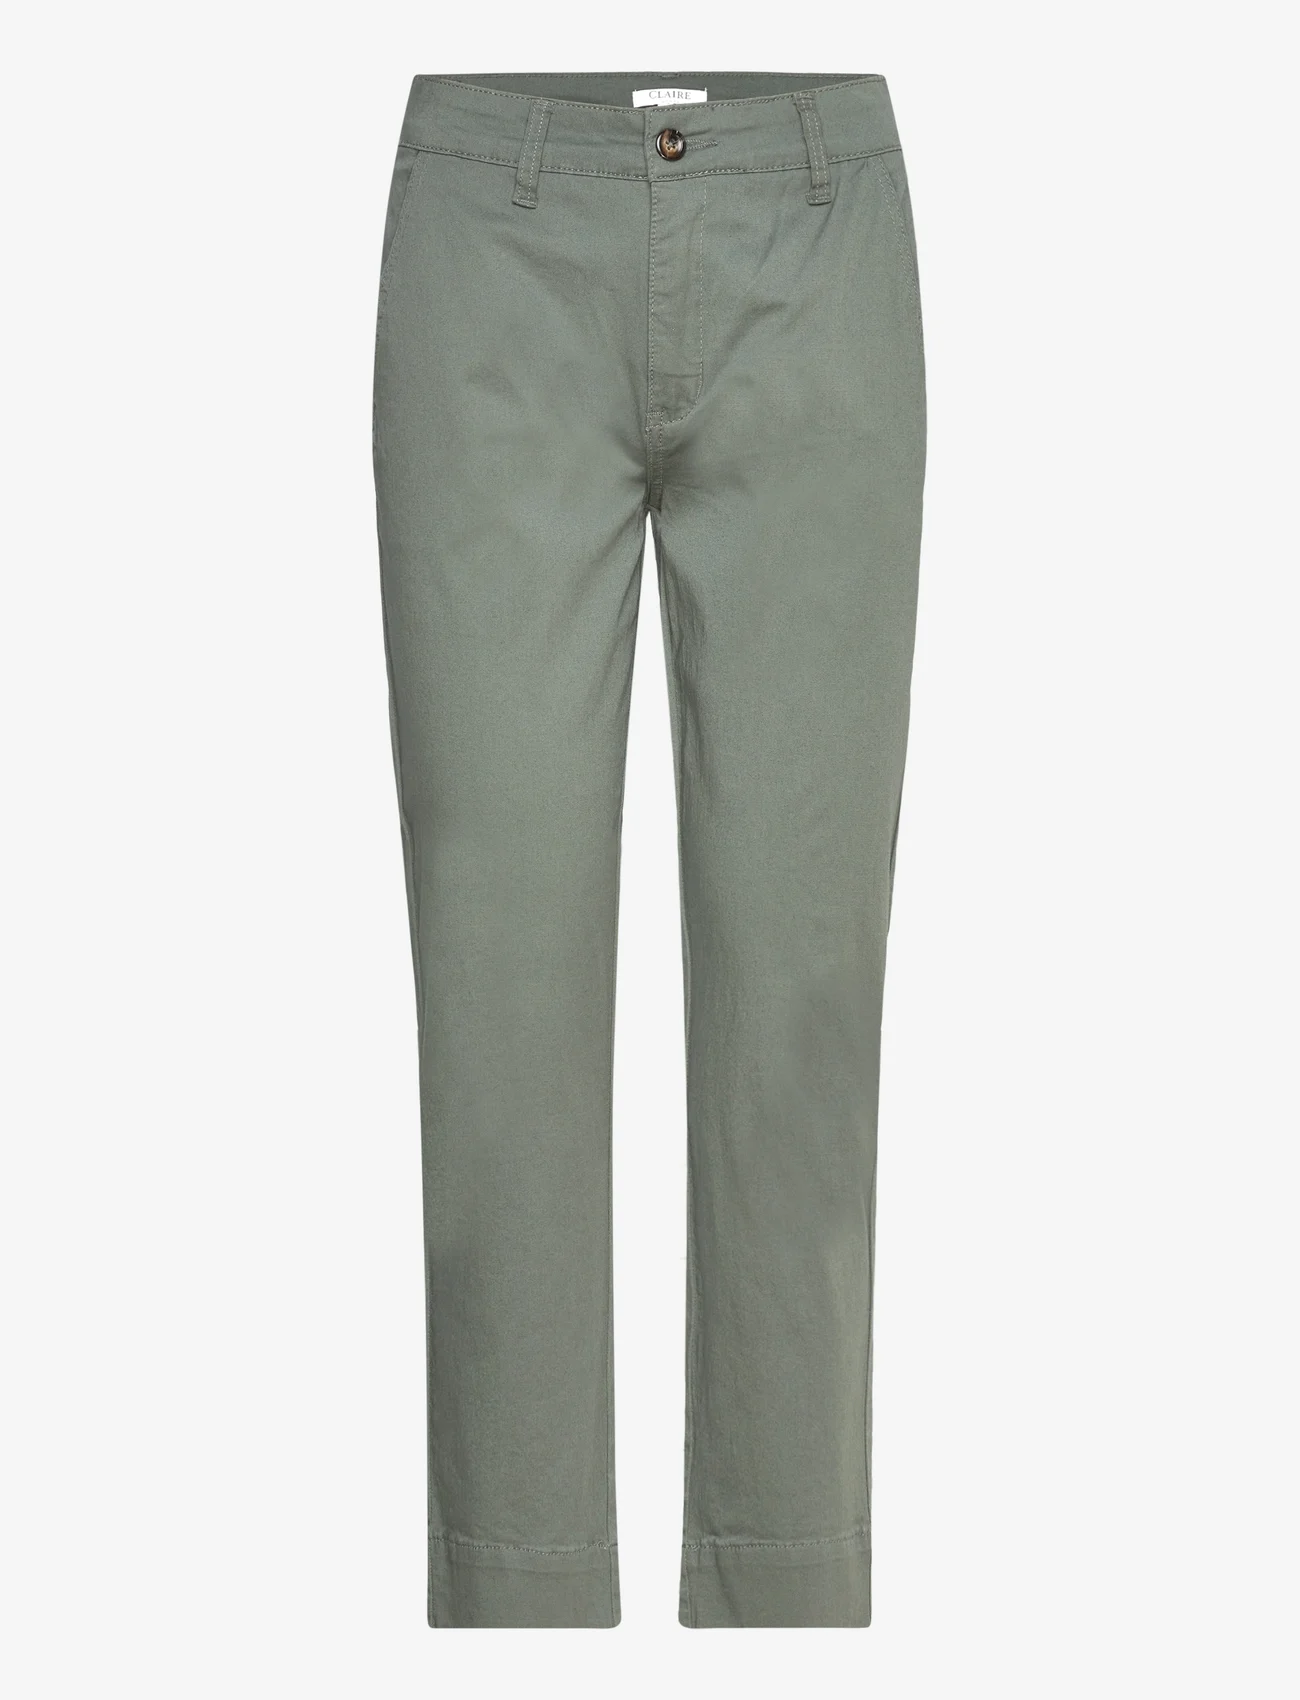 Claire Woman - Thareza - Trousers - chinos - olive dust - 0